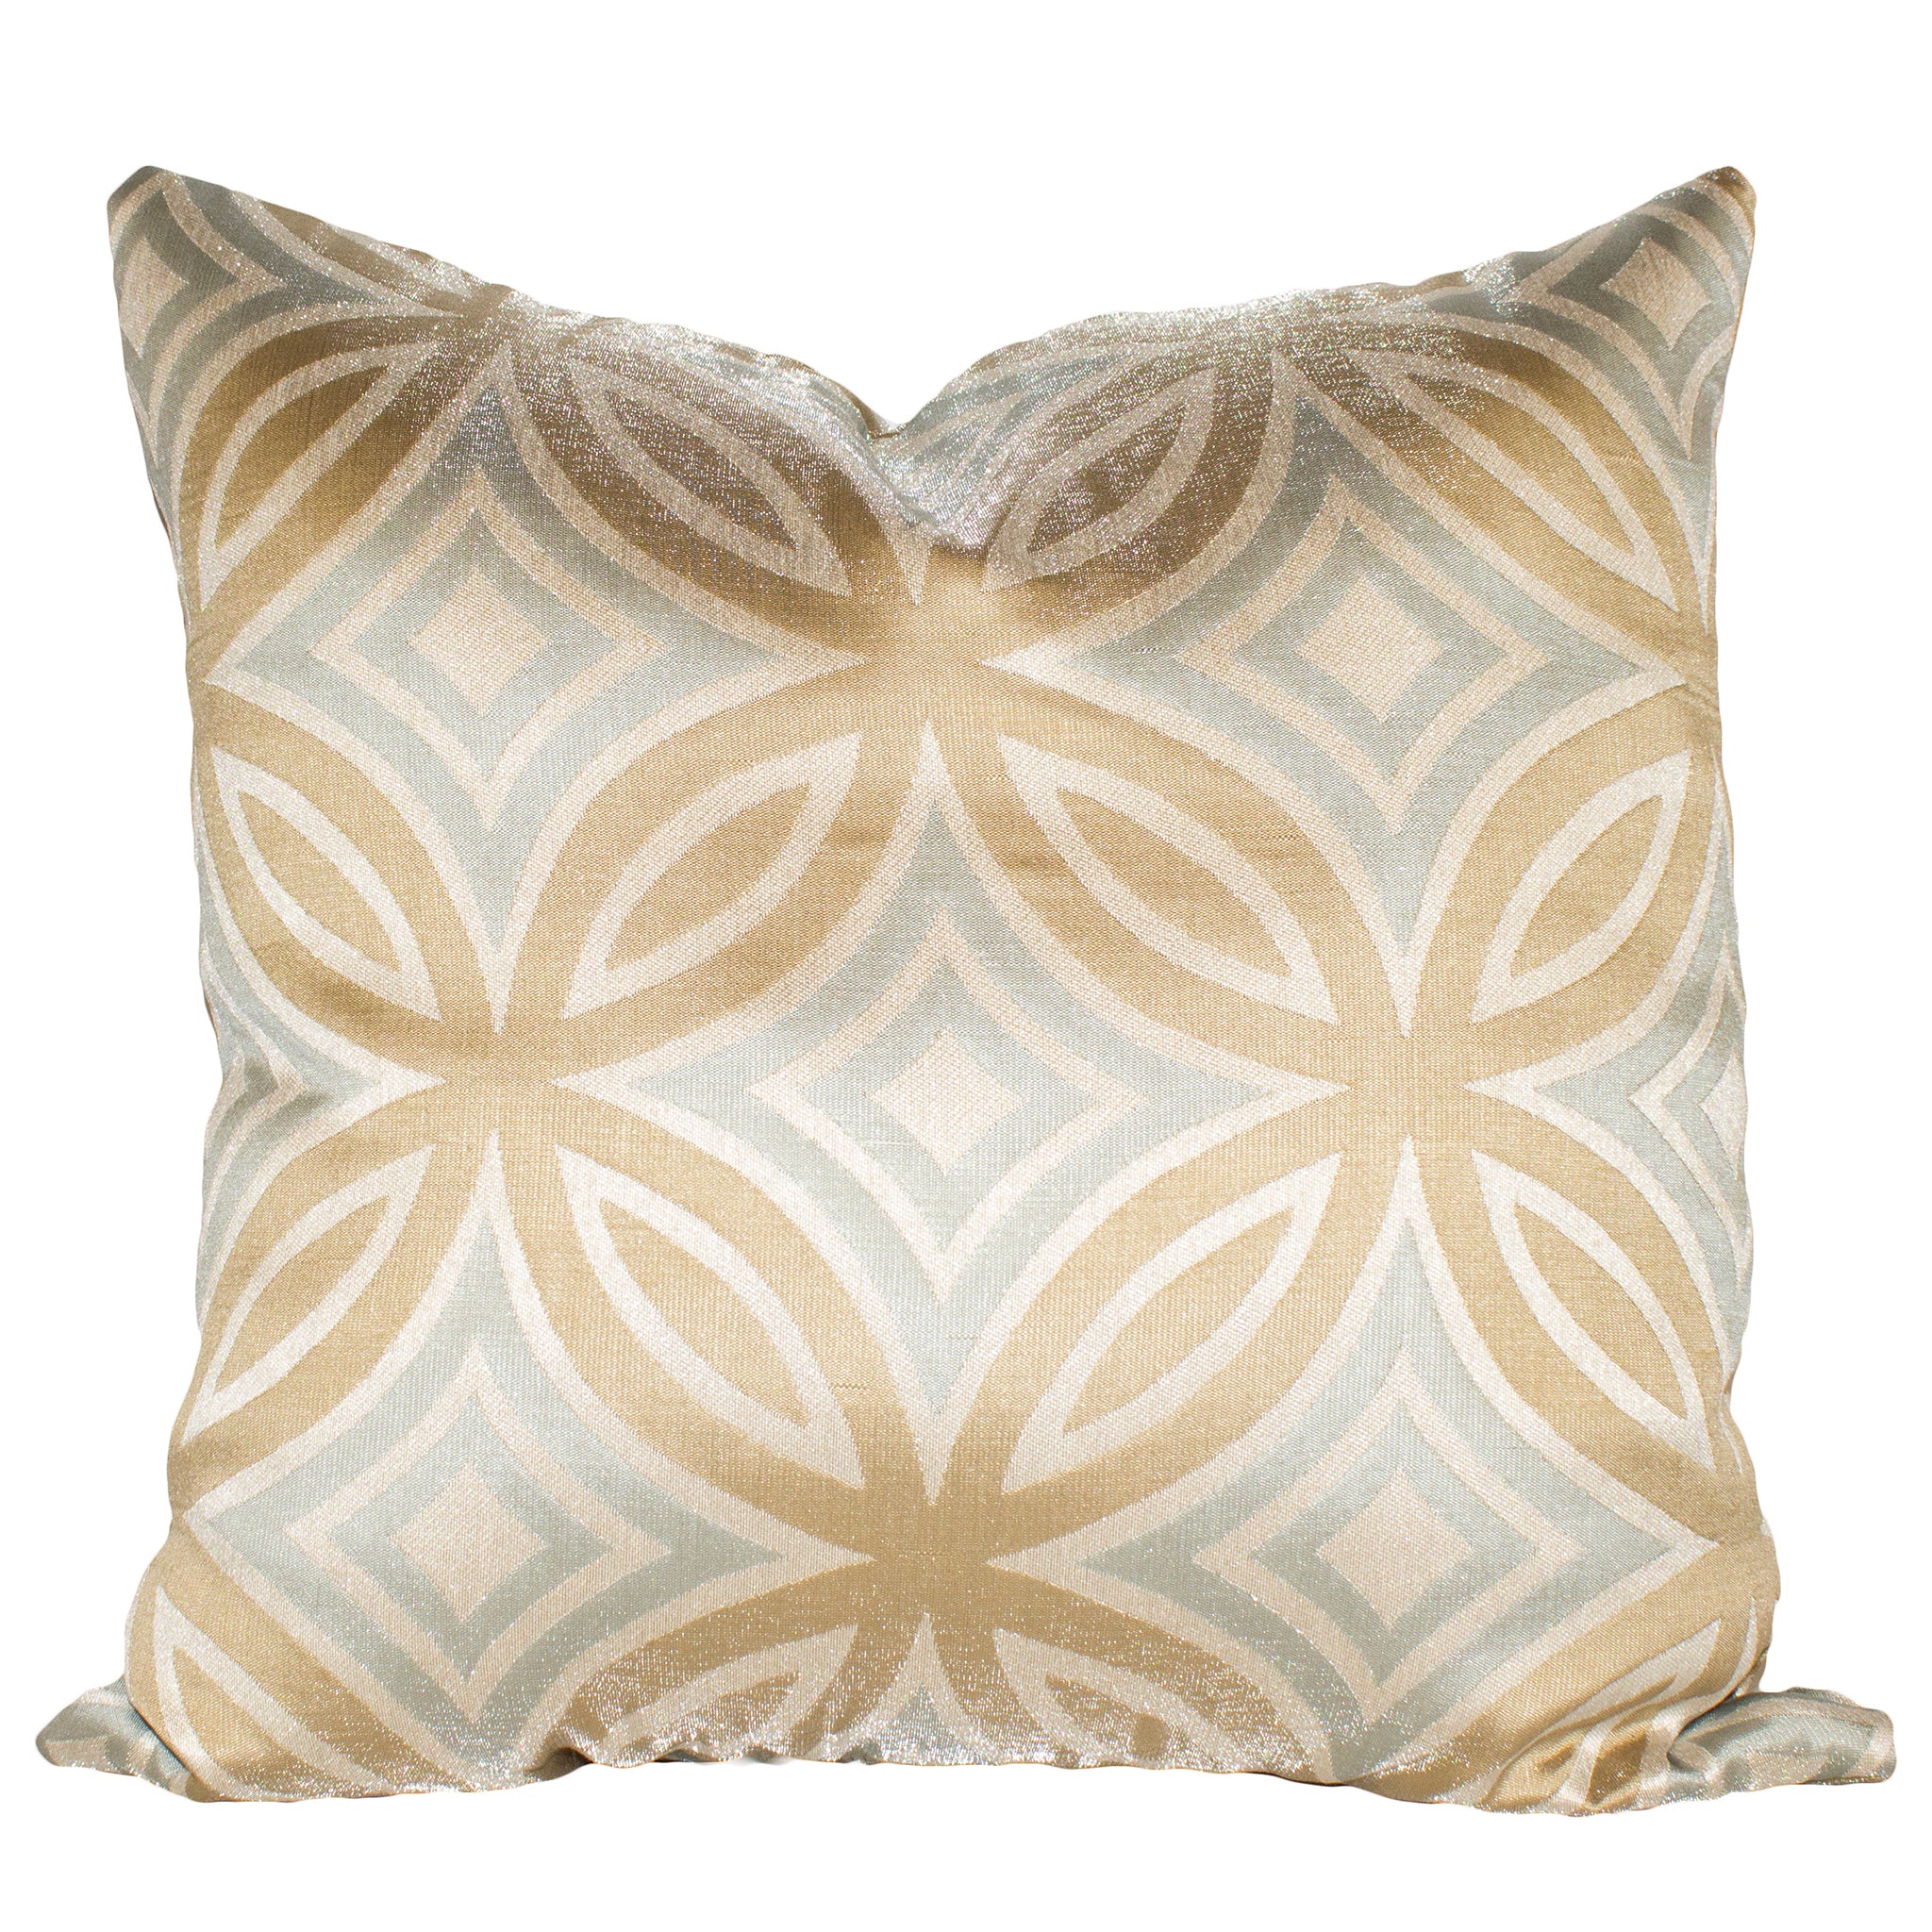 Courtyard Appeal Pillow